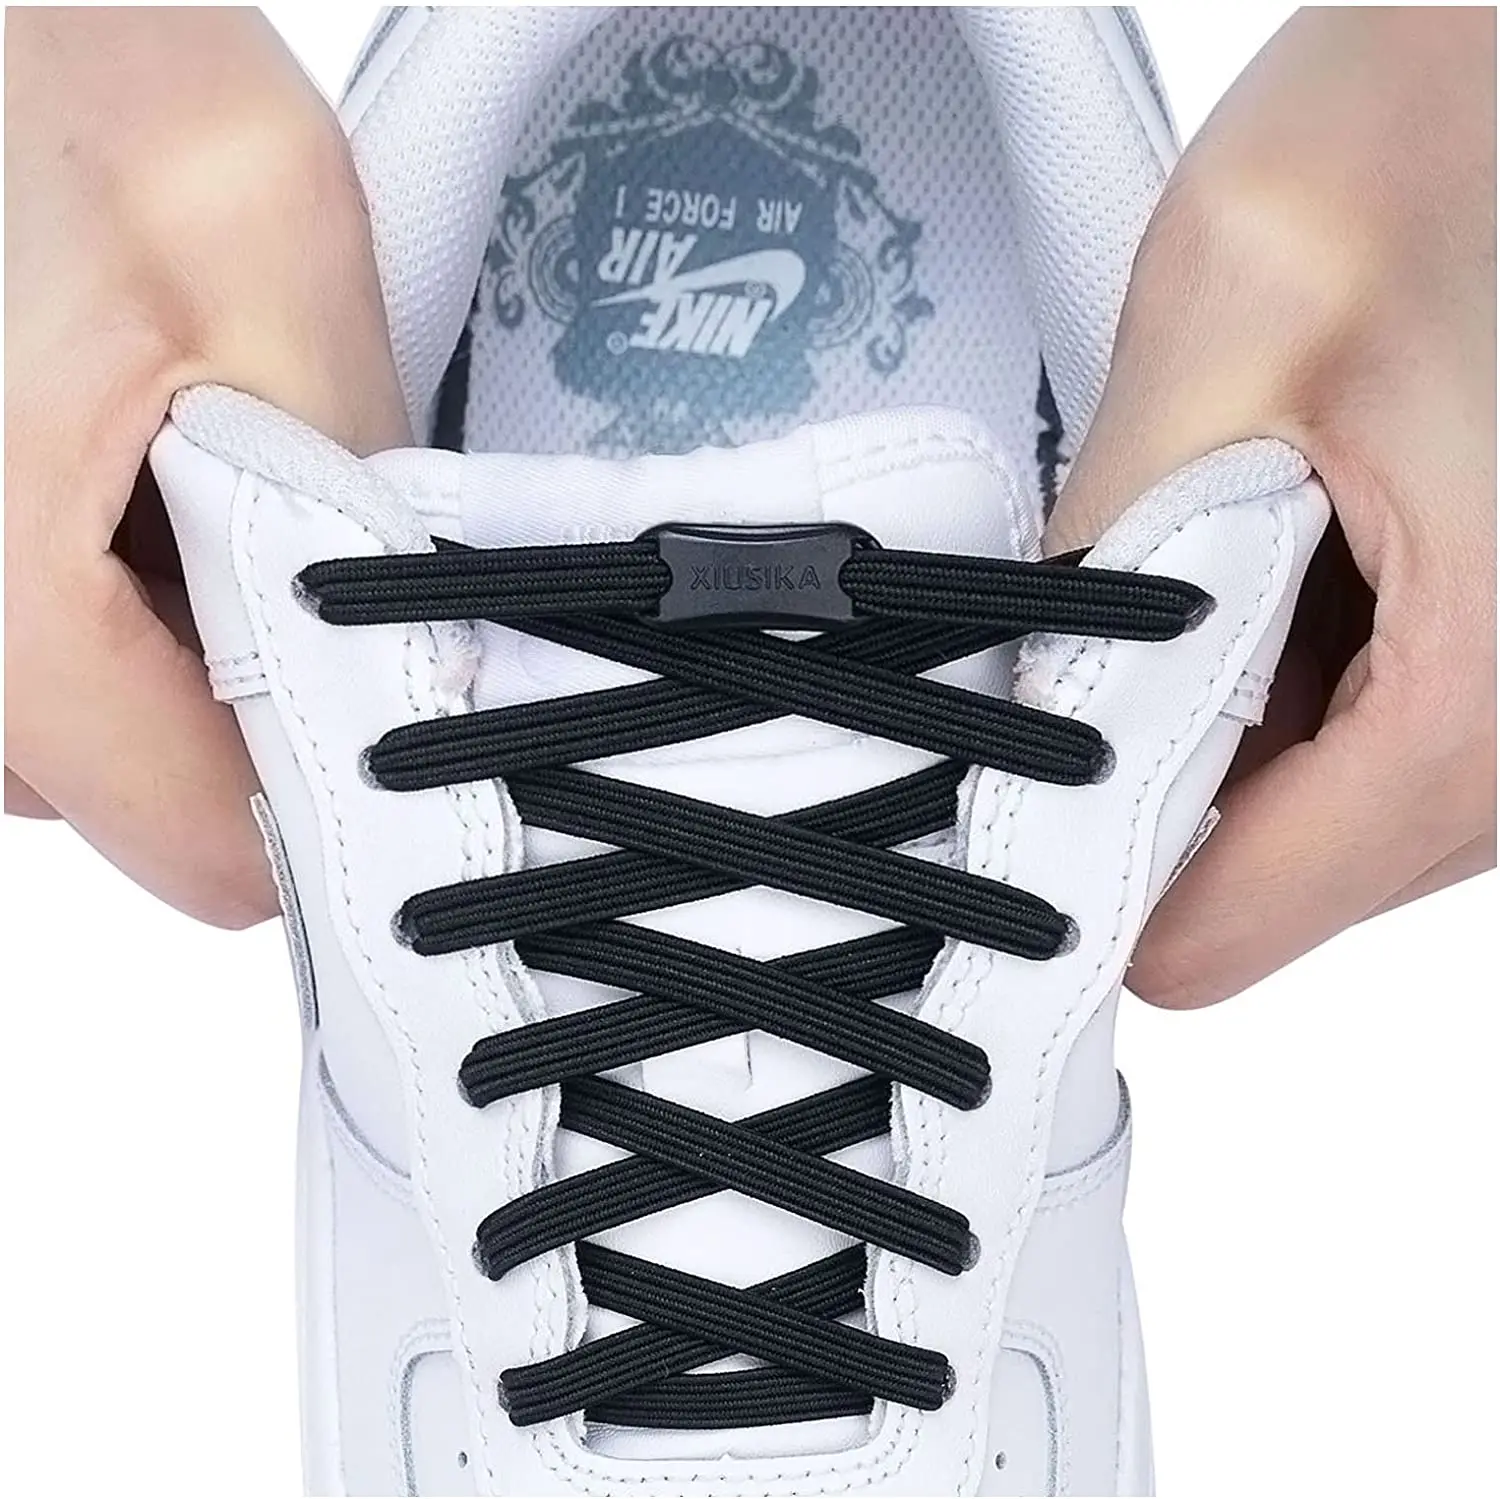 Black and White Shoelaces for Women Men Kid Cool Width Soports Flat Shoelaces Shoes Insoles & Accessories Shoelaces Different Sneaker Shoelaces Metal Buckle String Straps 